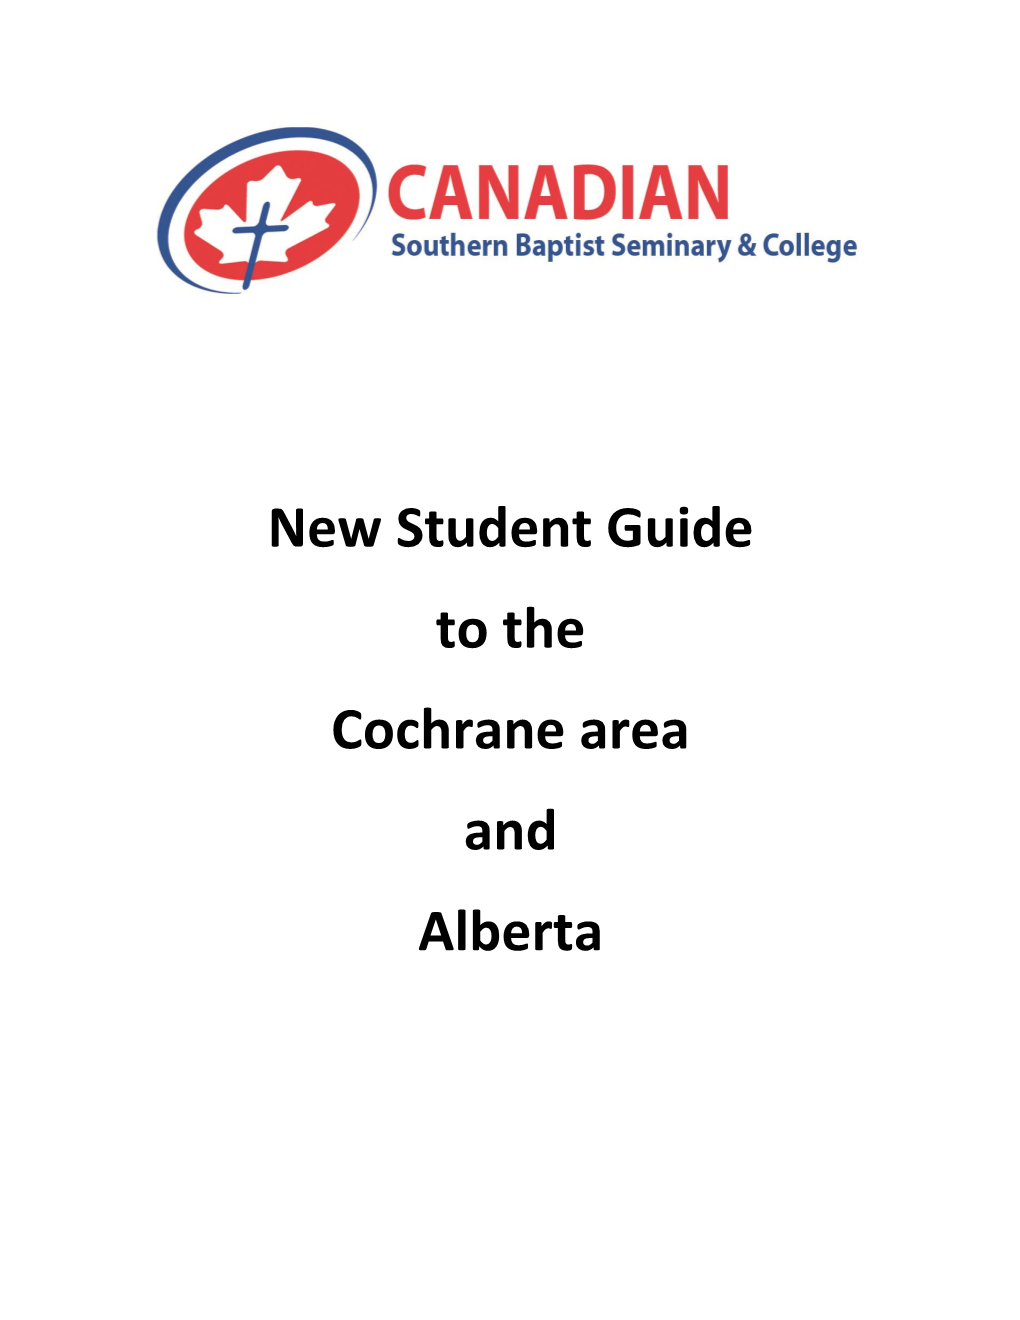 New Student Guide to the Cochrane Area and Alberta